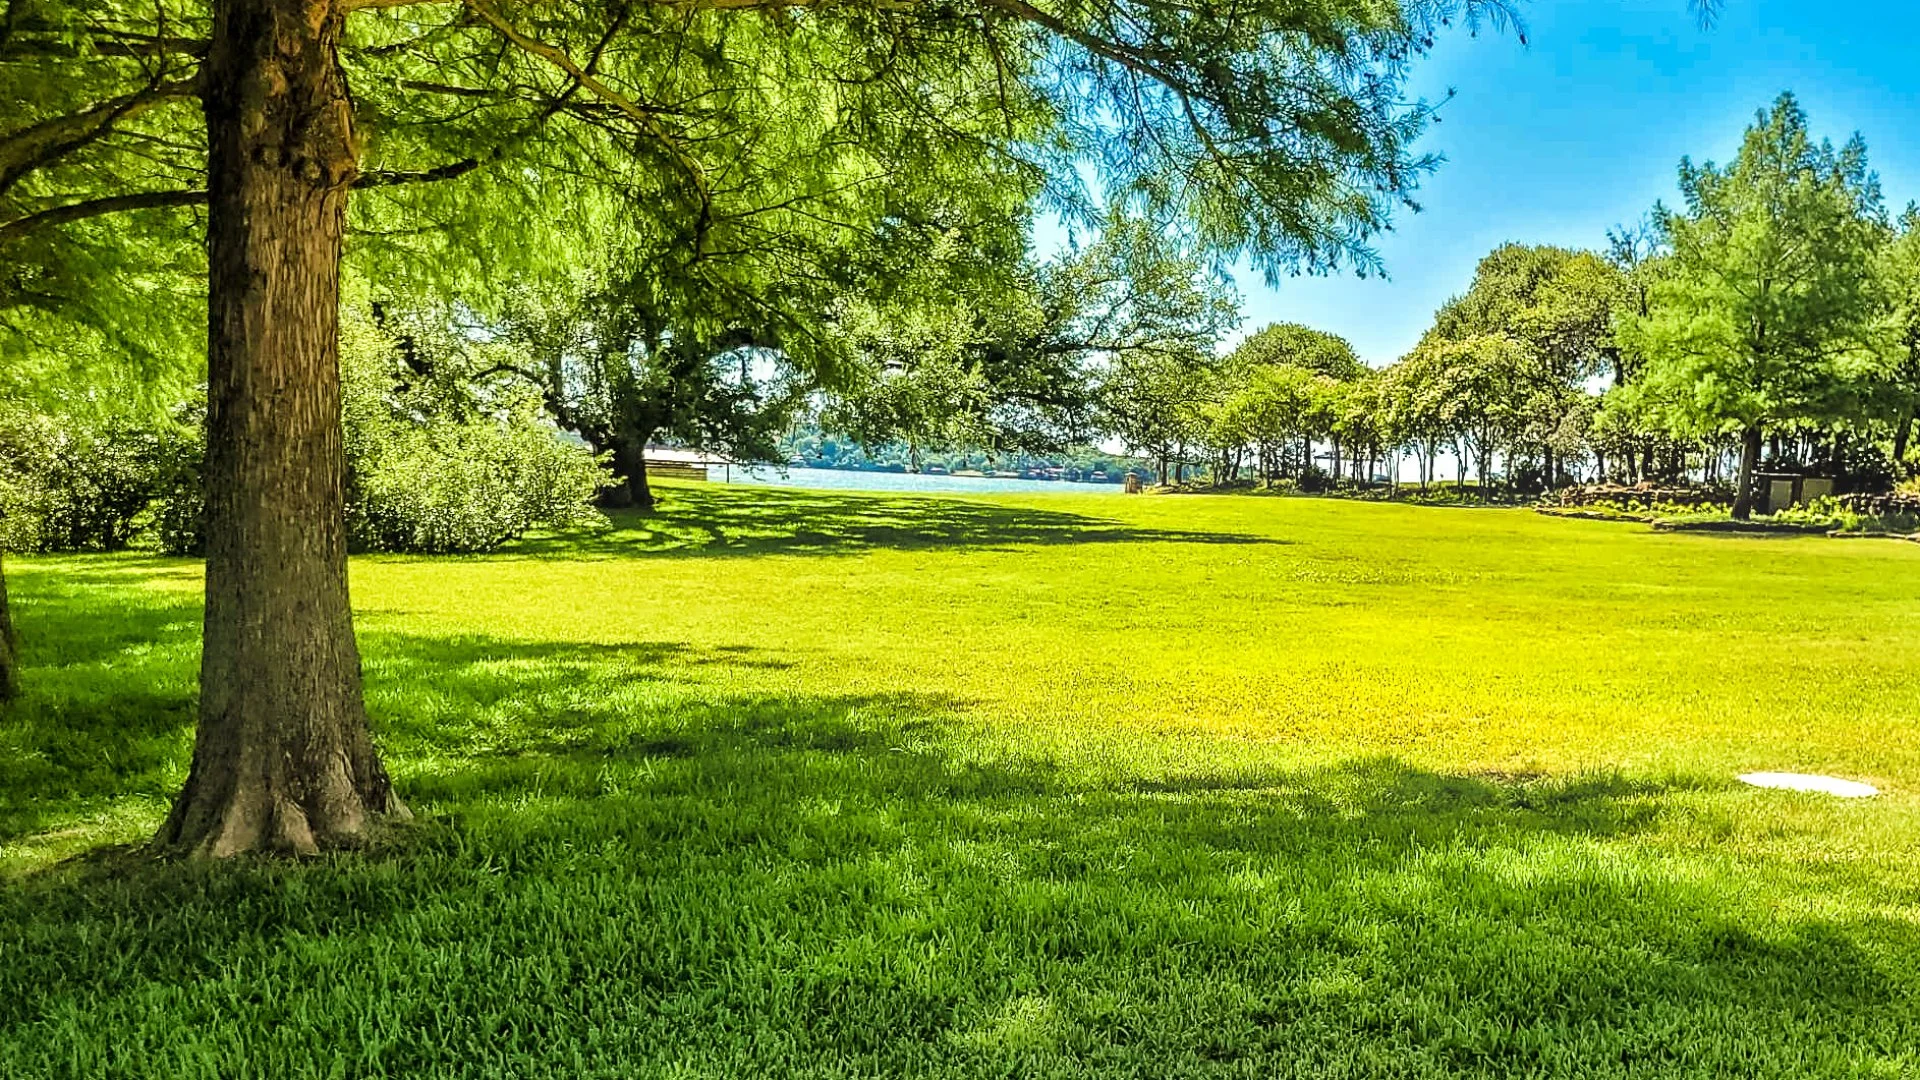 3 Reasons Why Applying Too Much Fertilizer to Your Lawn Is a Big Mistake